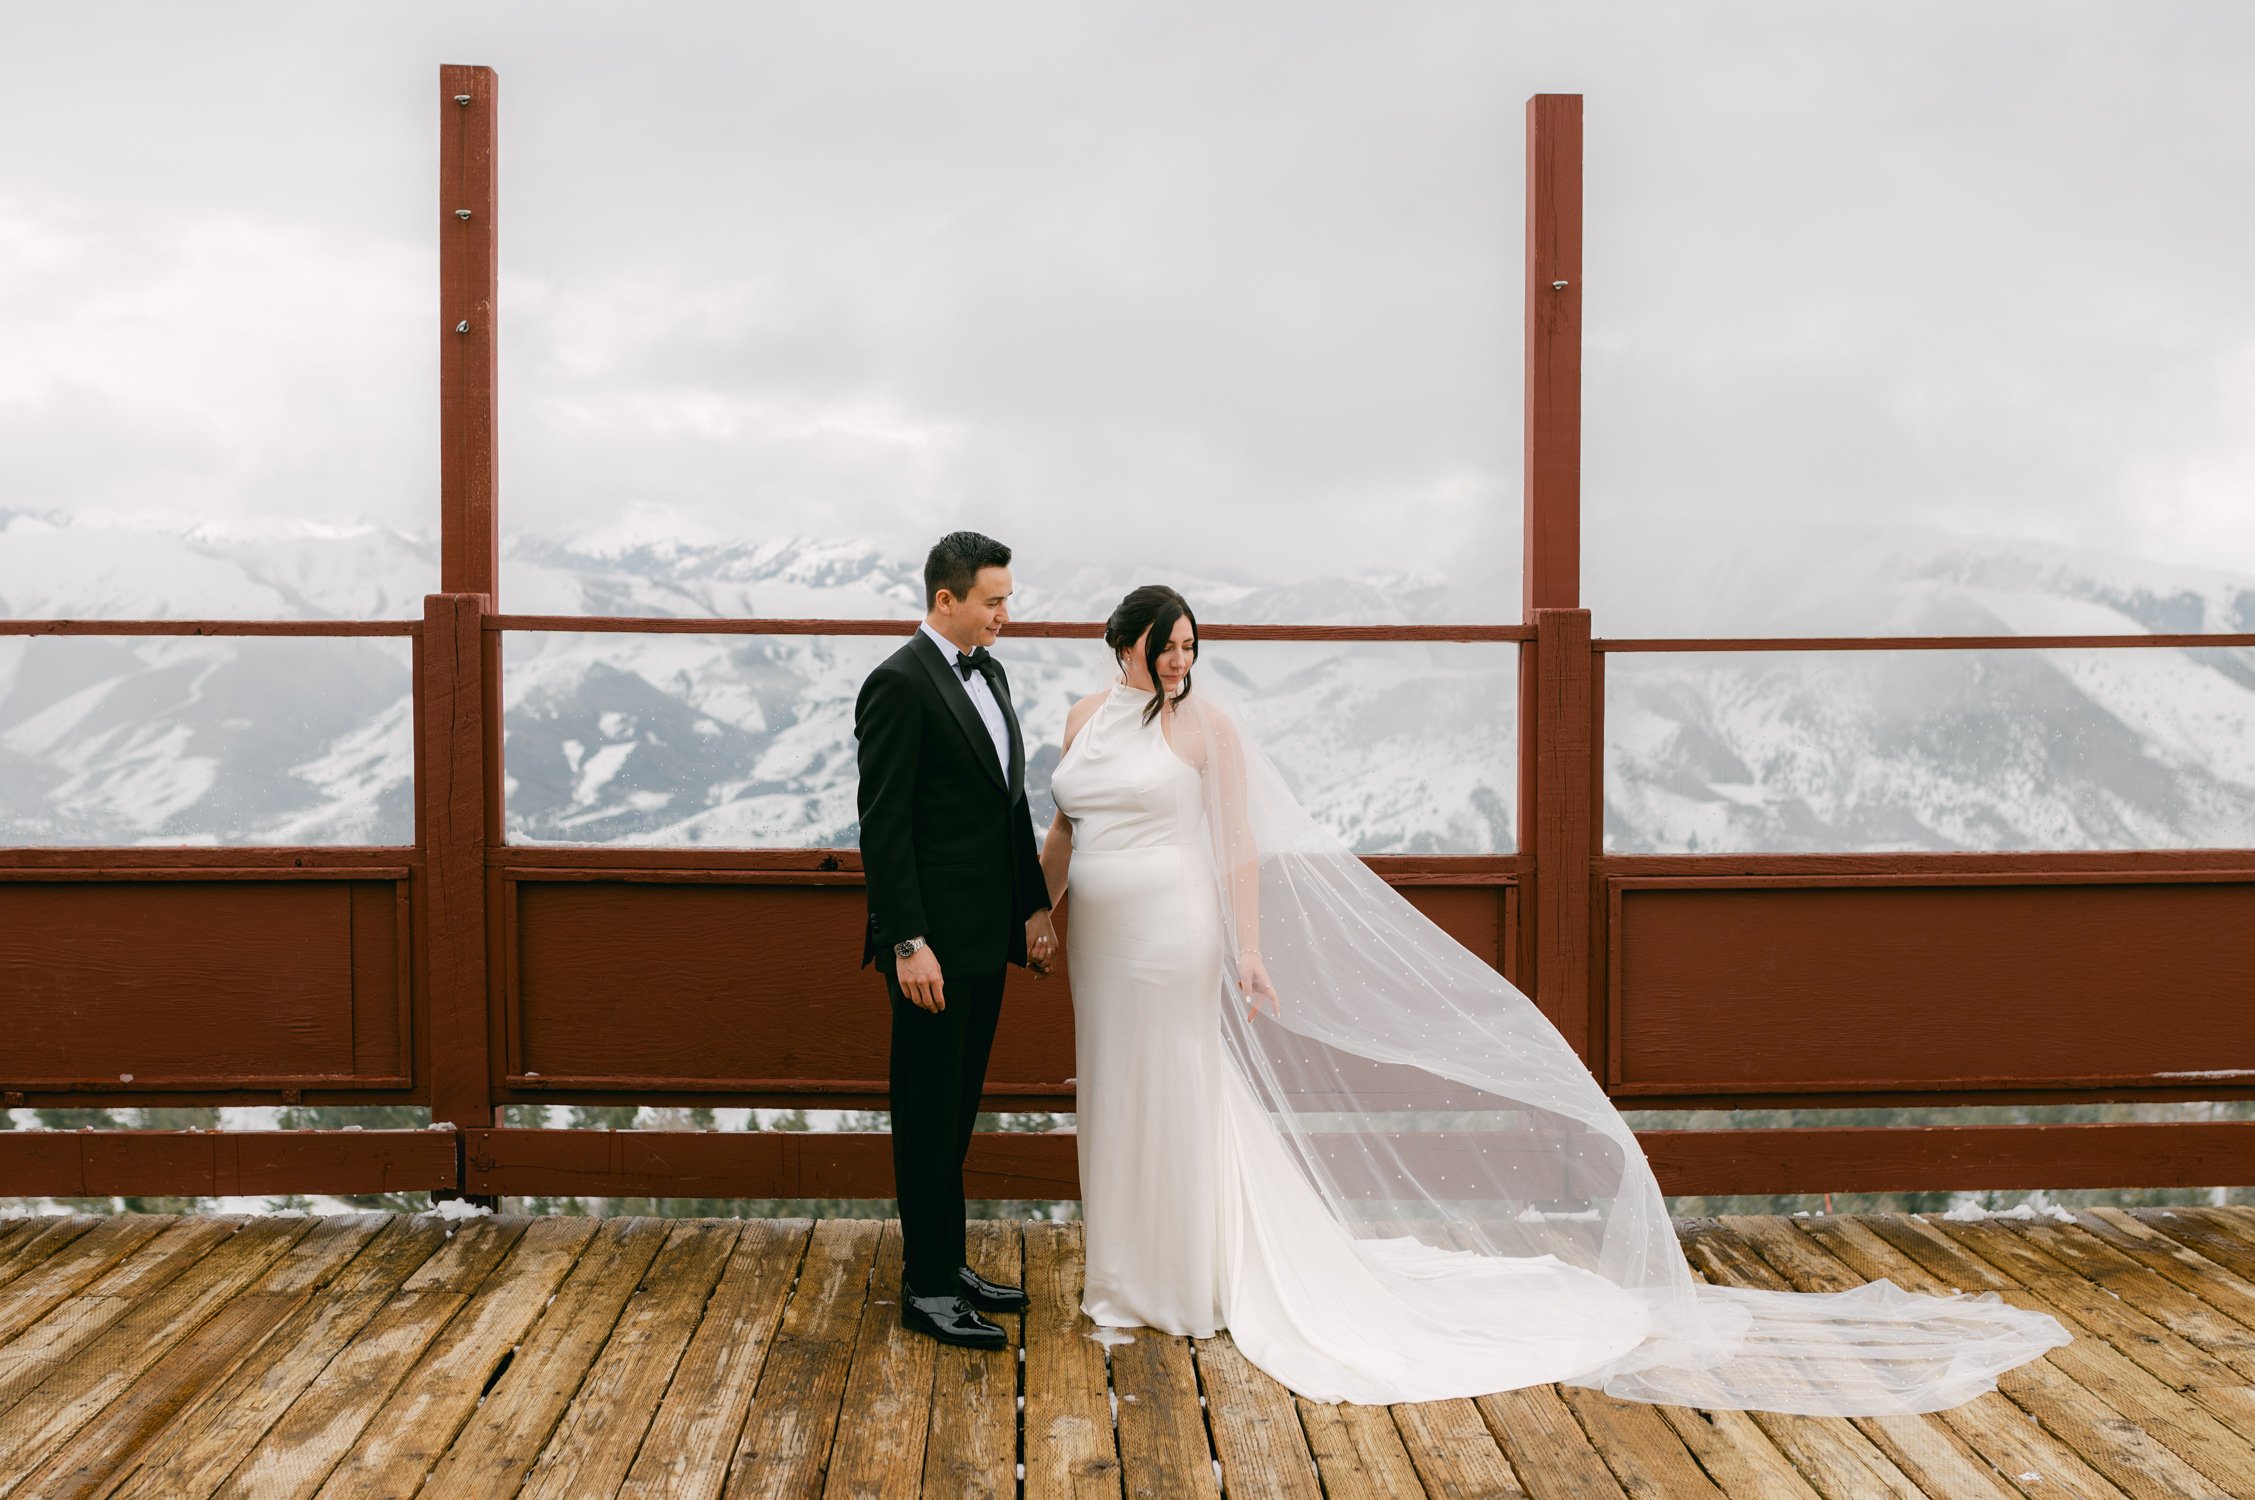 Sun Valley Roundhouse Wedding photo of the bride and groom during their first look while the bride's veil is flying in the wind 